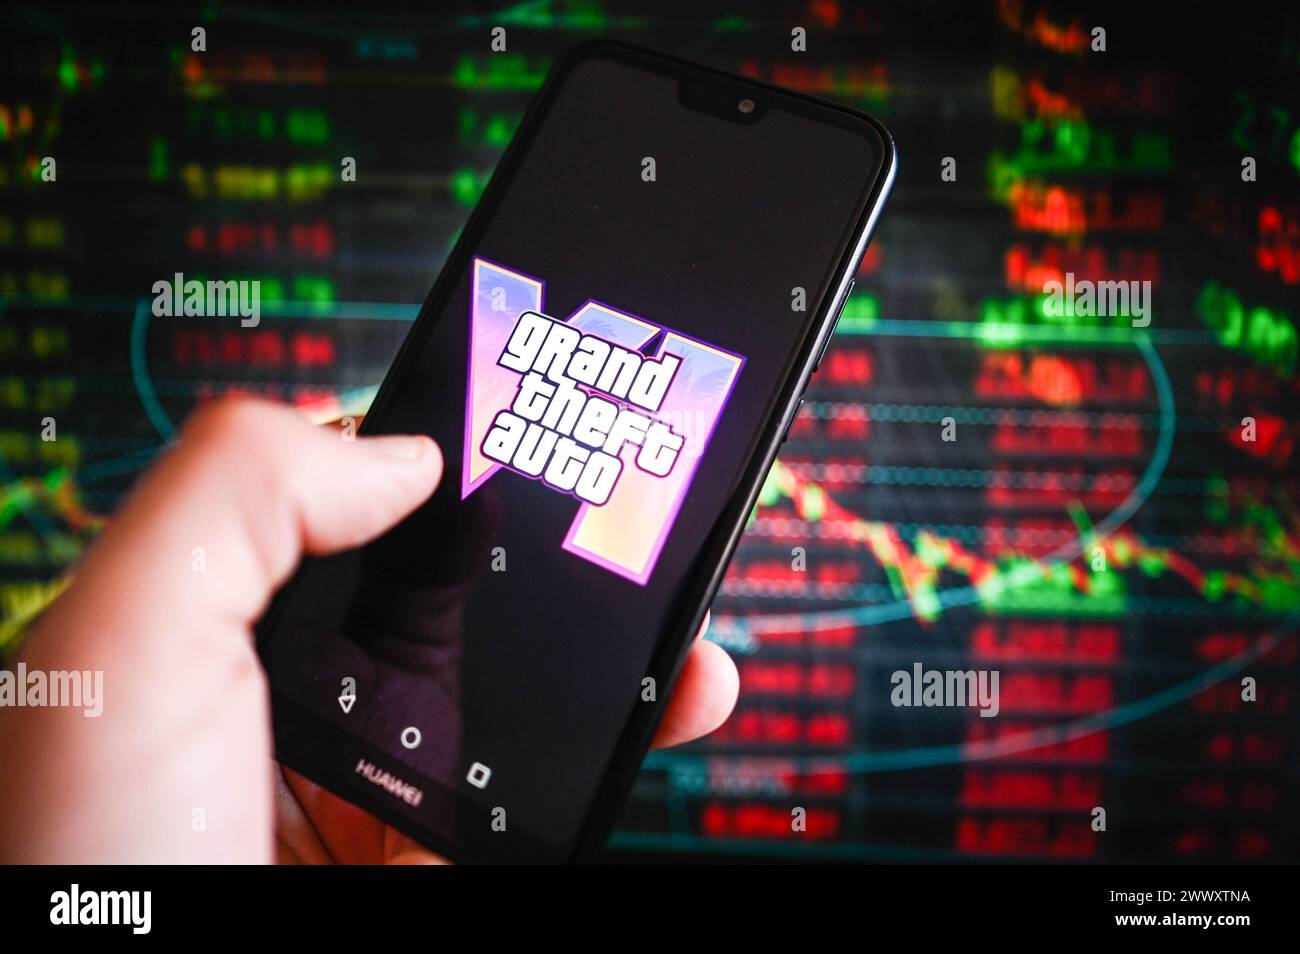 In this photo illustration, a Grand Theft Auto VI logo is displayed on a smartphone with stock market percentages in the background. Stock Photo